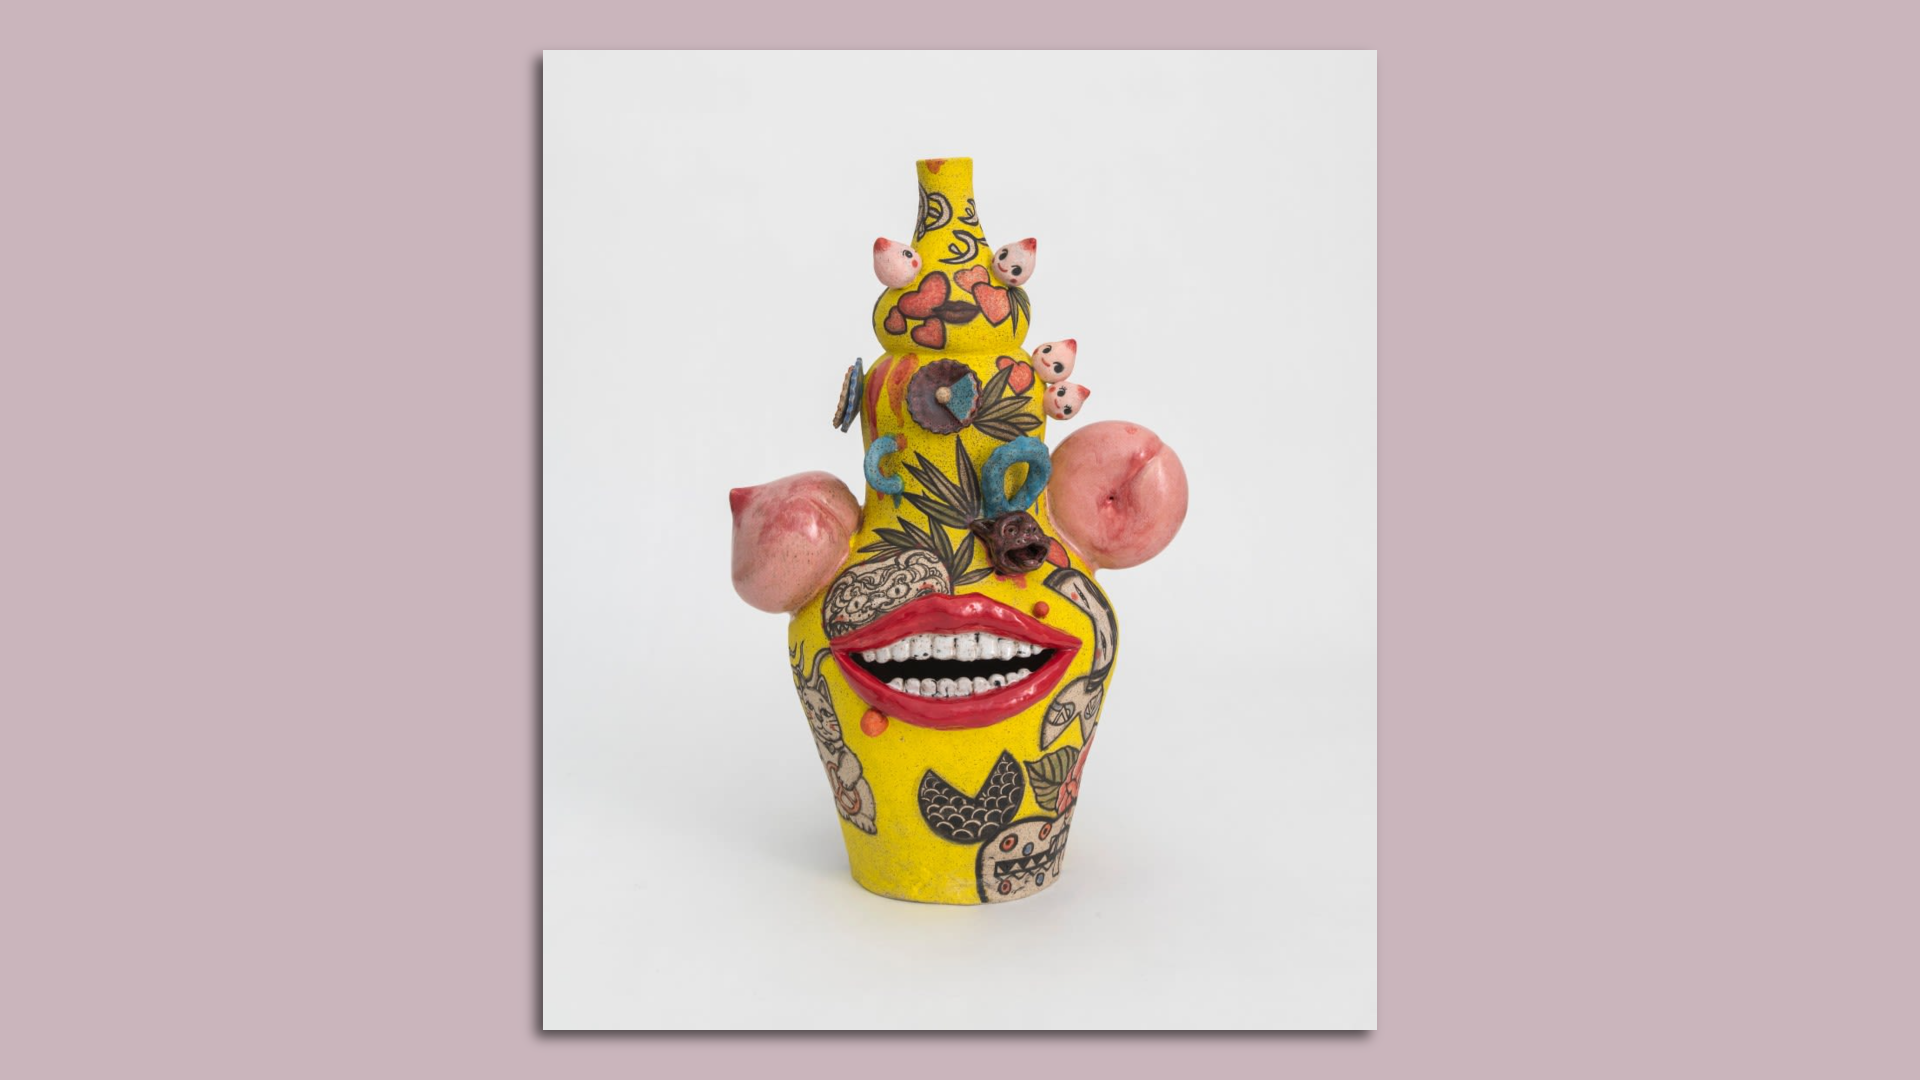 A yellow clay jug decorated with a clay mouth and peaches.